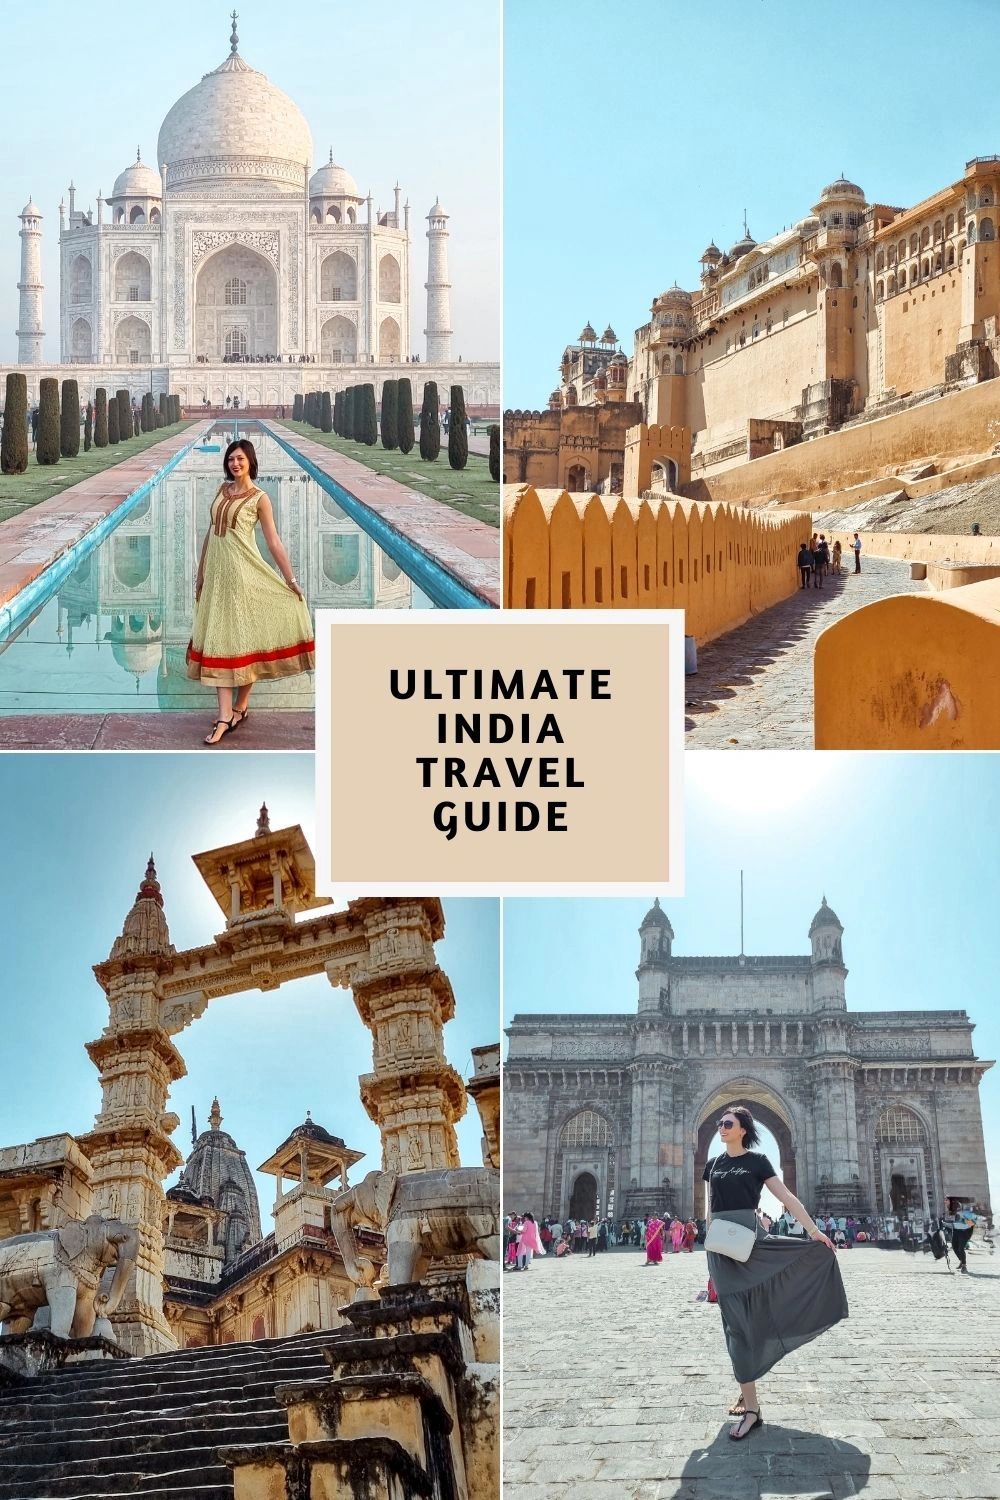 Ultimate India Travel Guide